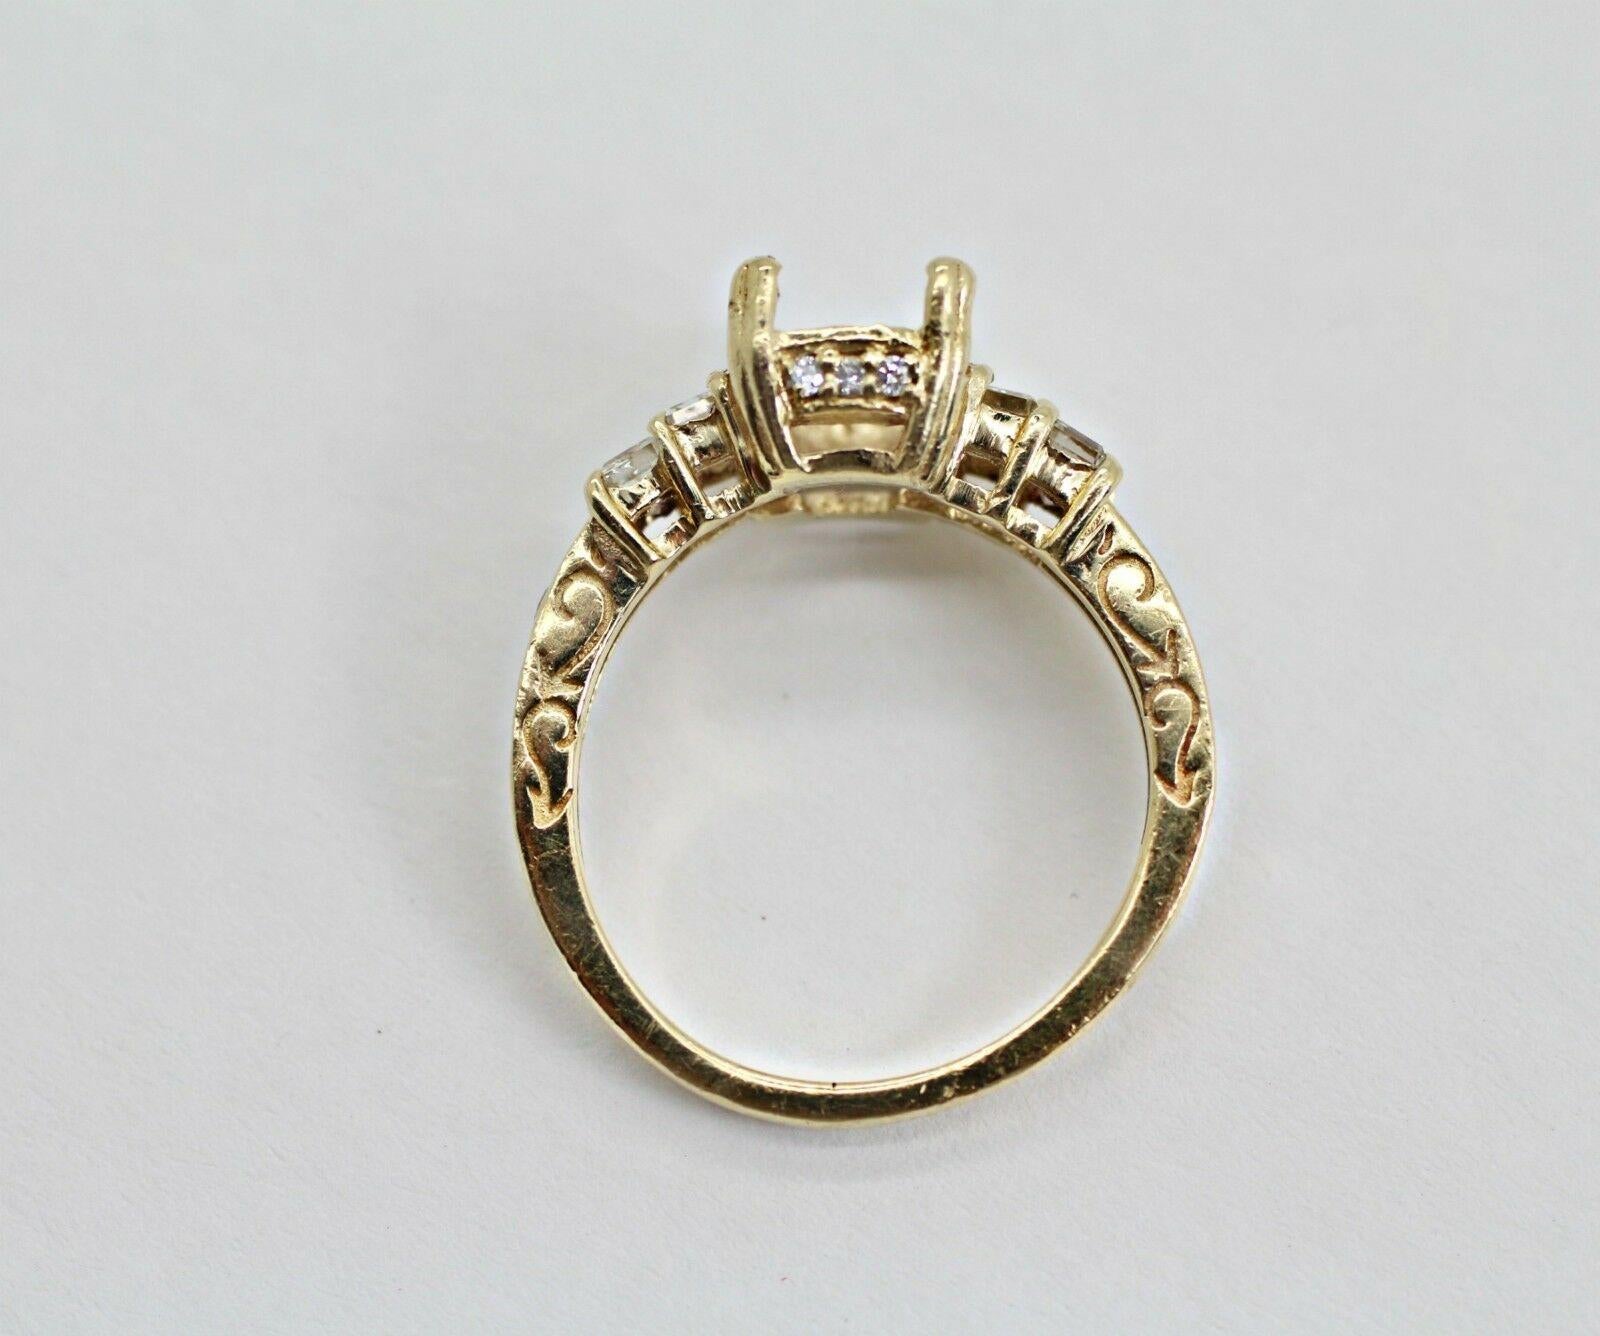 Women's or Men's Vintage 14 Karat Yellow Gold Ring with Approximately 0.45 Carat Total Weight